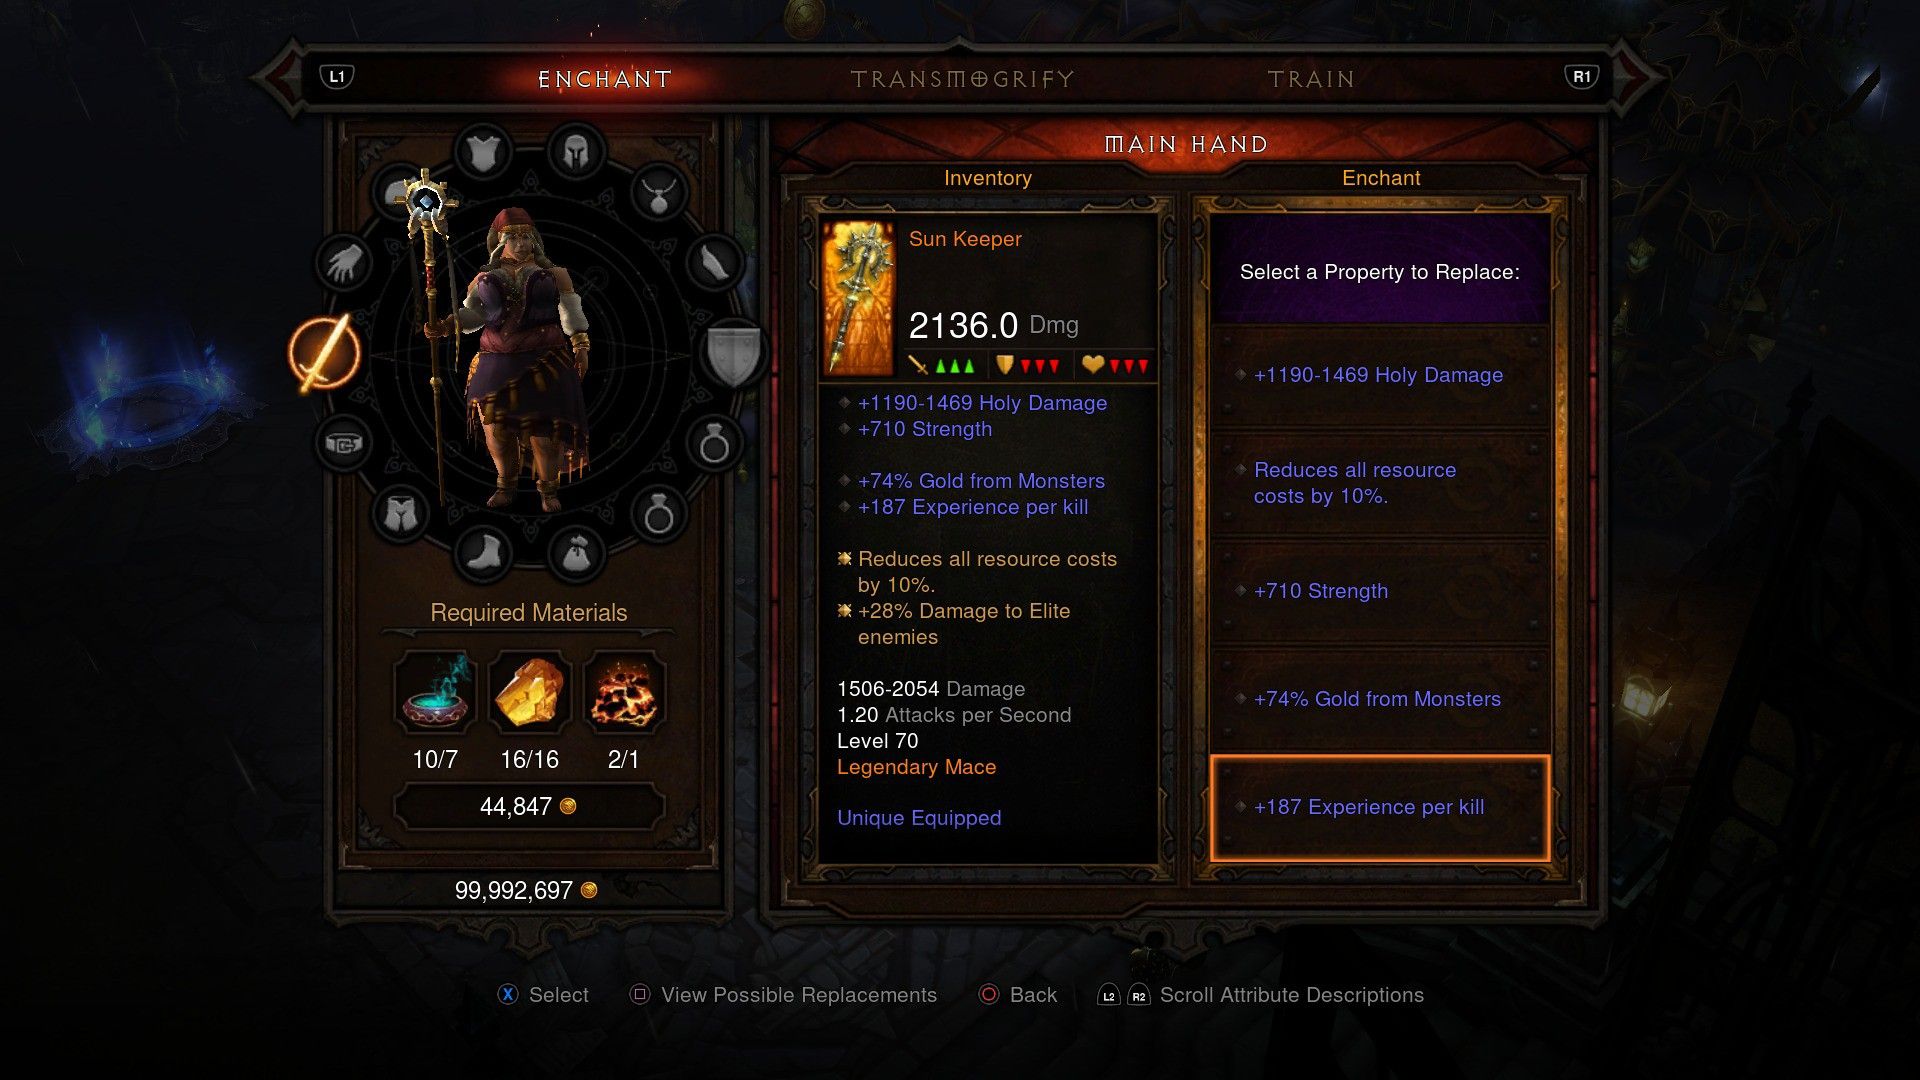 diablo-3-ultimate-evil-edition-gets-massive-batch-of-screenshots-showing-new-features